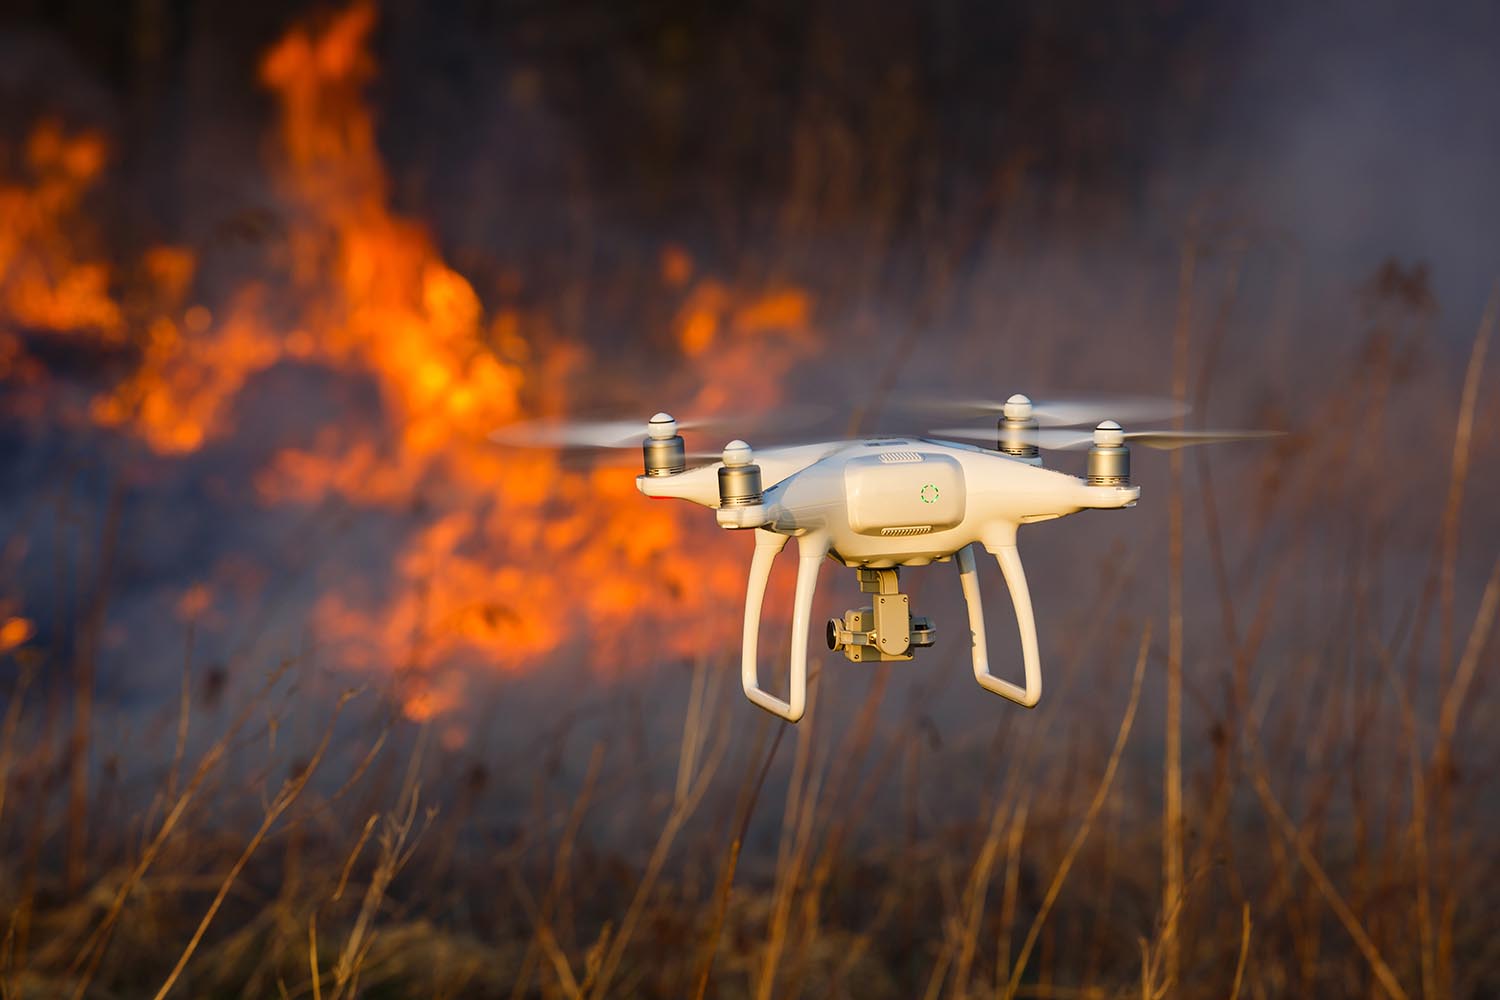 The Drone Flies Against The Background Of A Spring Forest Fire